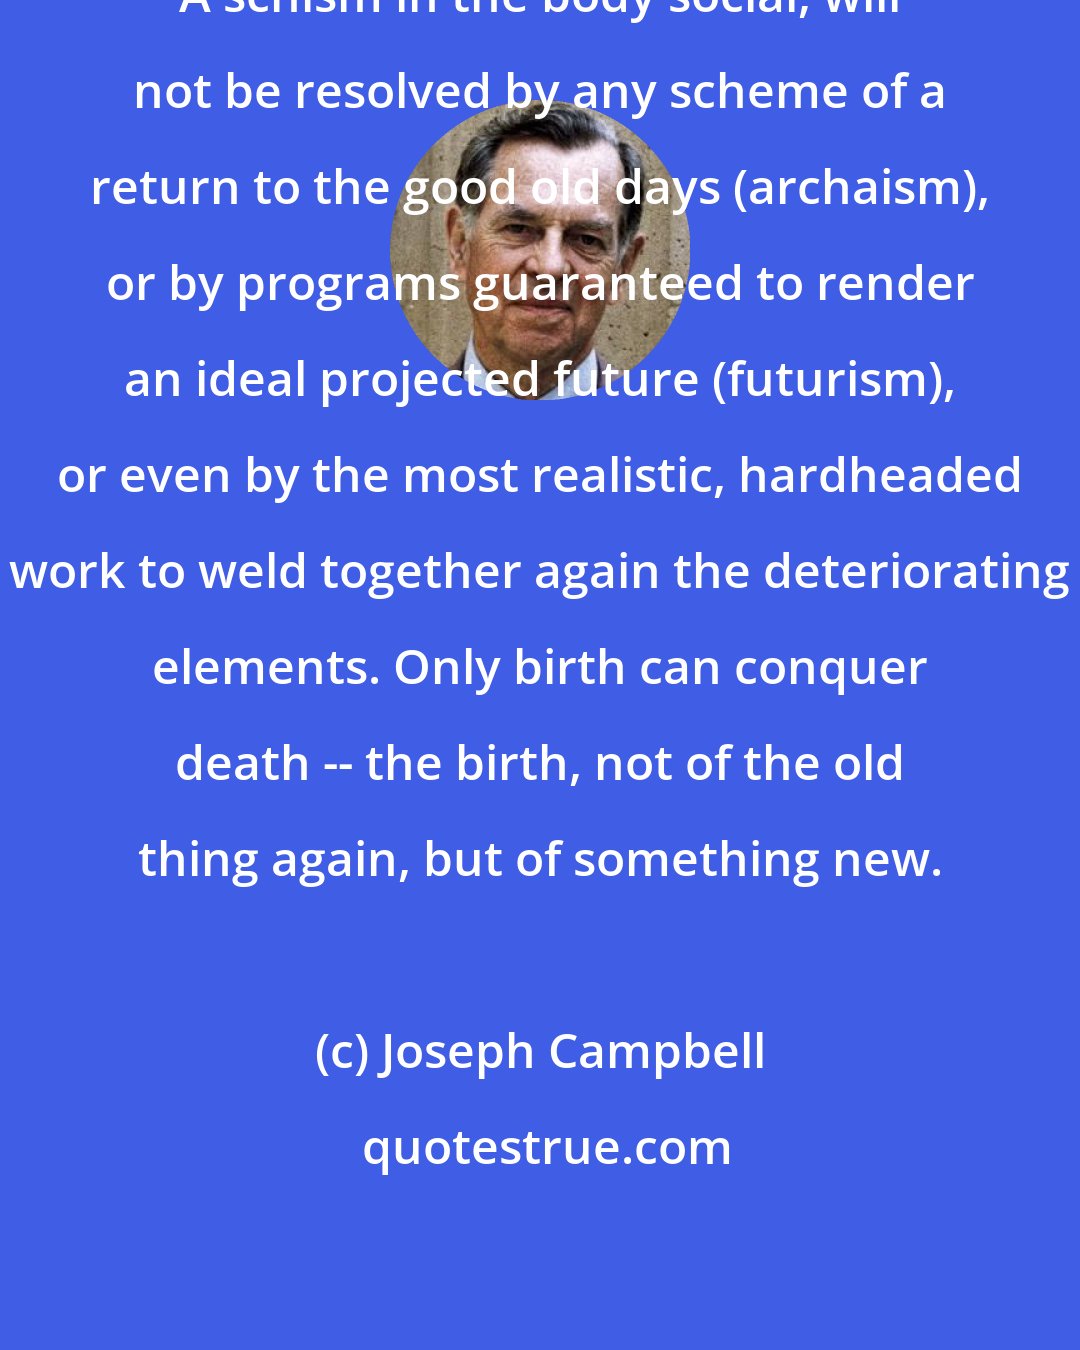 Joseph Campbell: A schism in the body social, will not be resolved by any scheme of a return to the good old days (archaism), or by programs guaranteed to render an ideal projected future (futurism), or even by the most realistic, hardheaded work to weld together again the deteriorating elements. Only birth can conquer death -- the birth, not of the old thing again, but of something new.